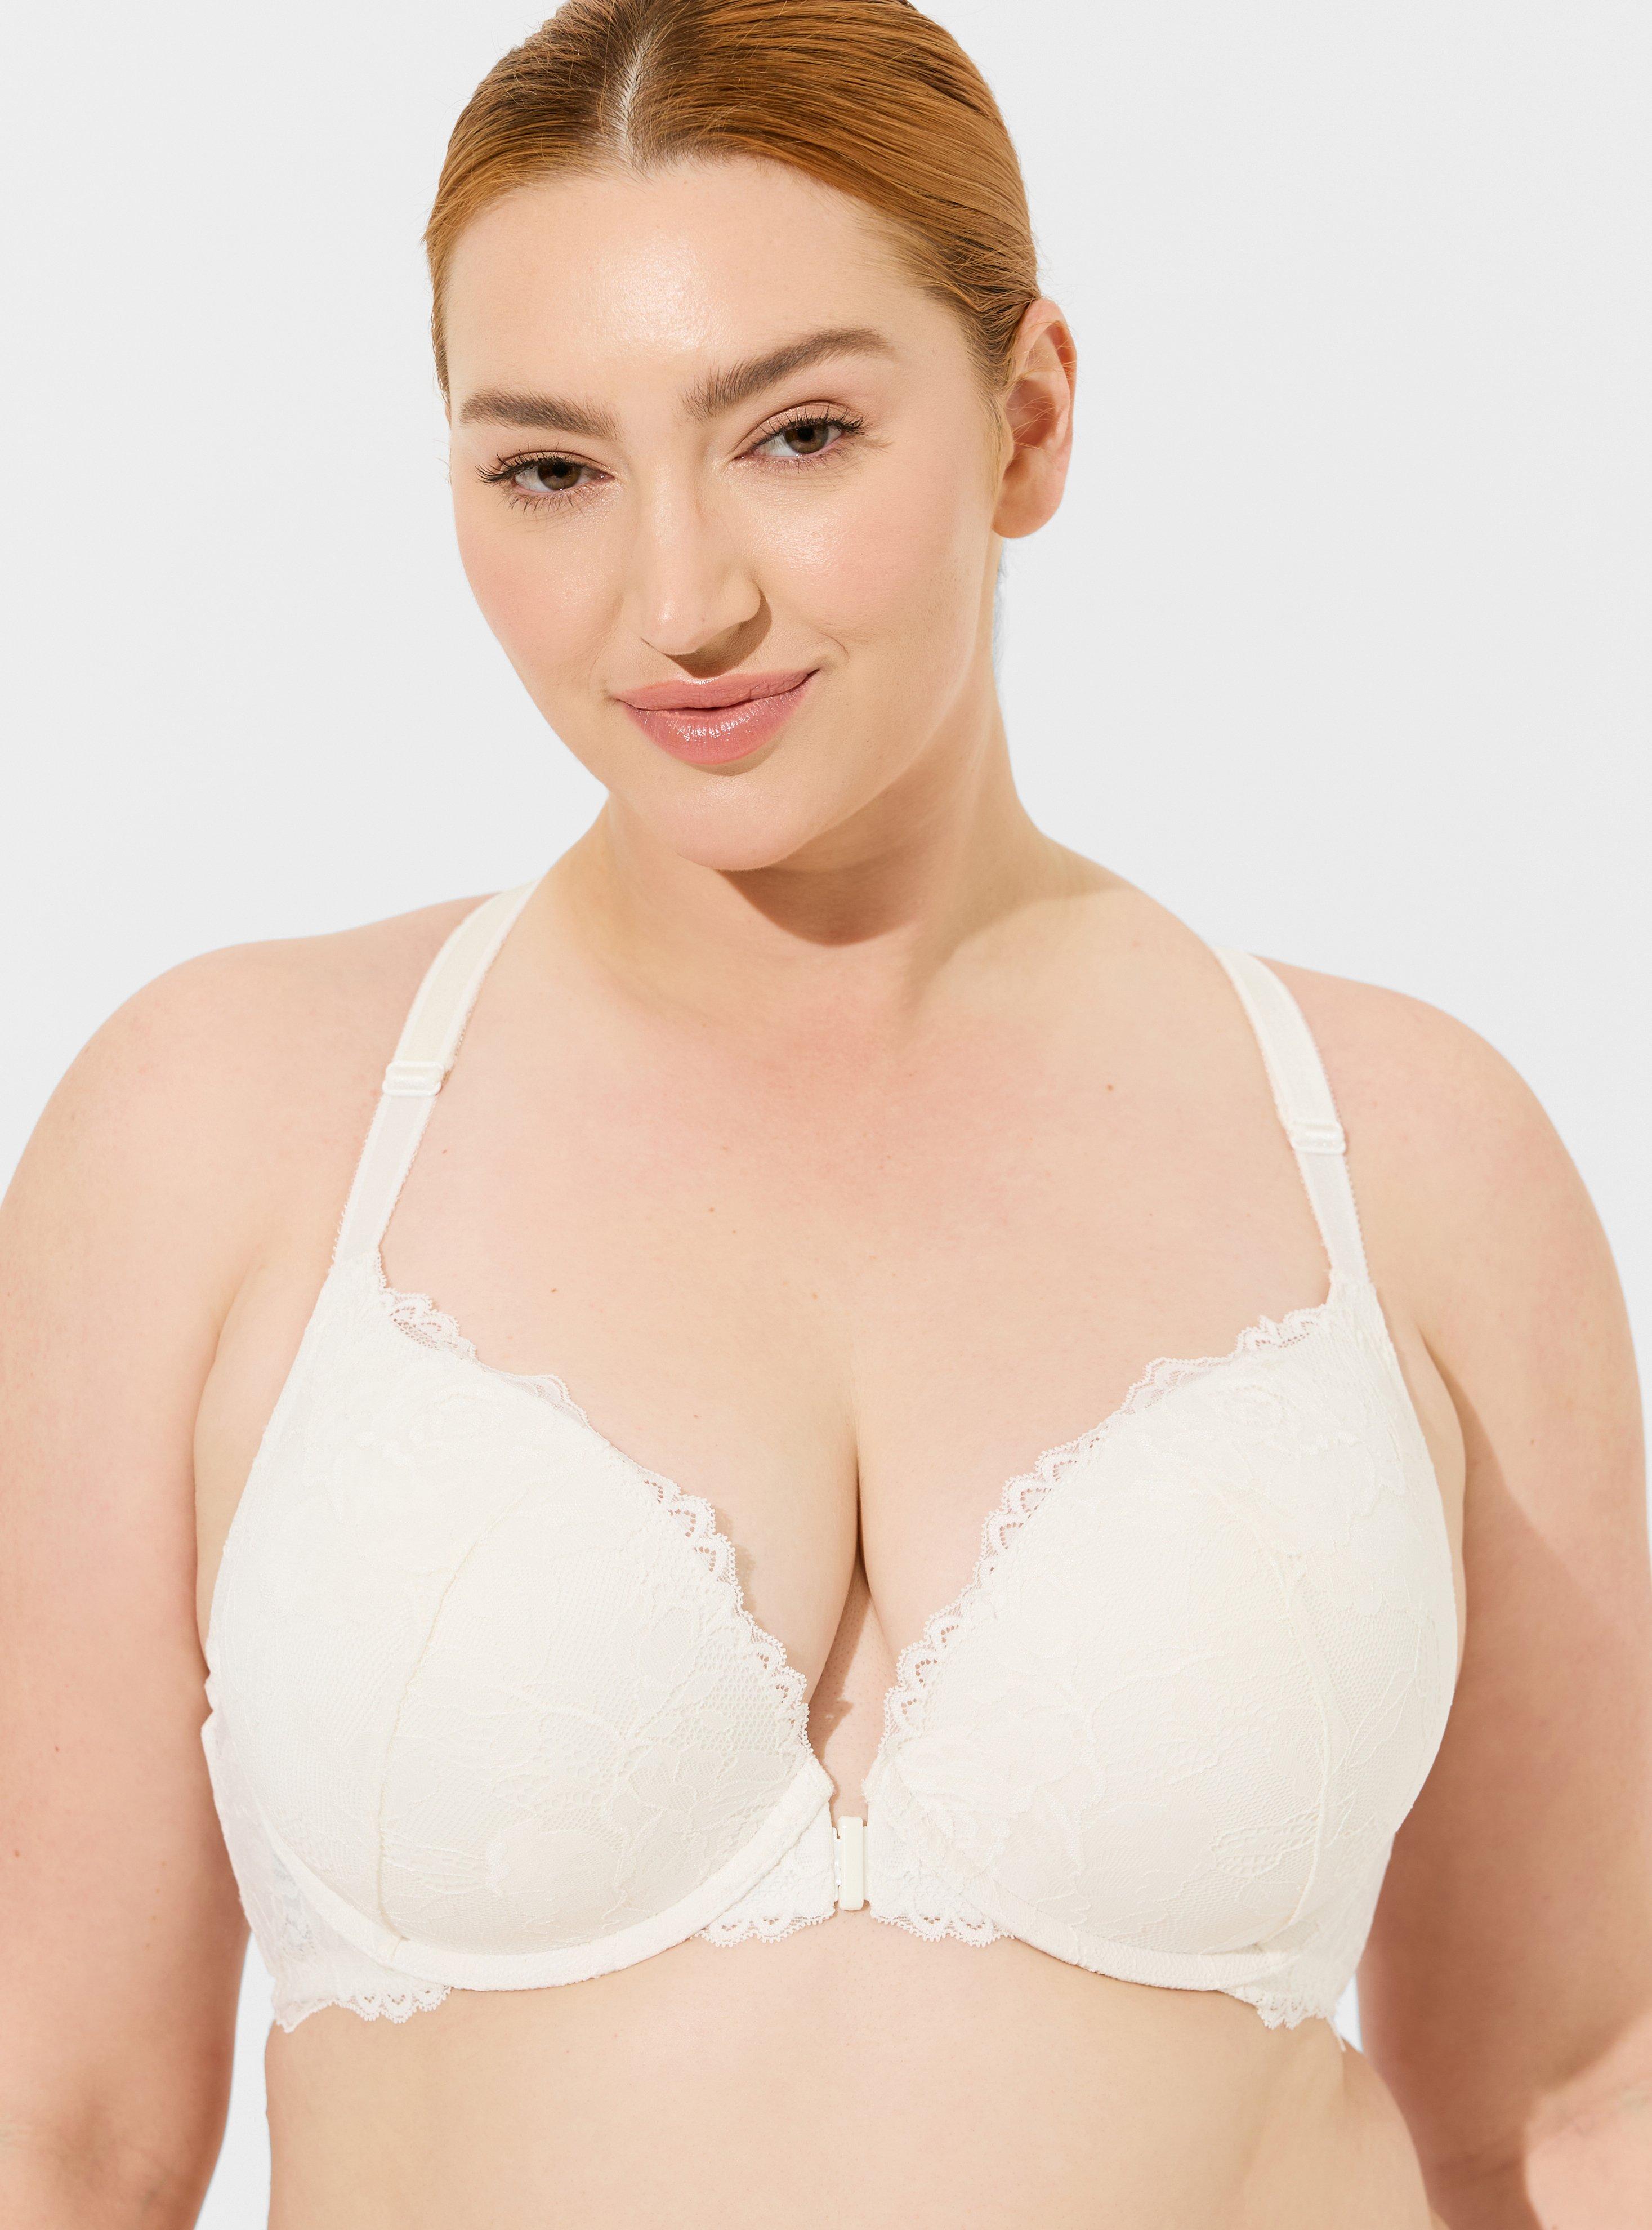 STRAPLESS BRA TRY ON HAUL FOR BIG BUST! ASOS PLUS/CURVY